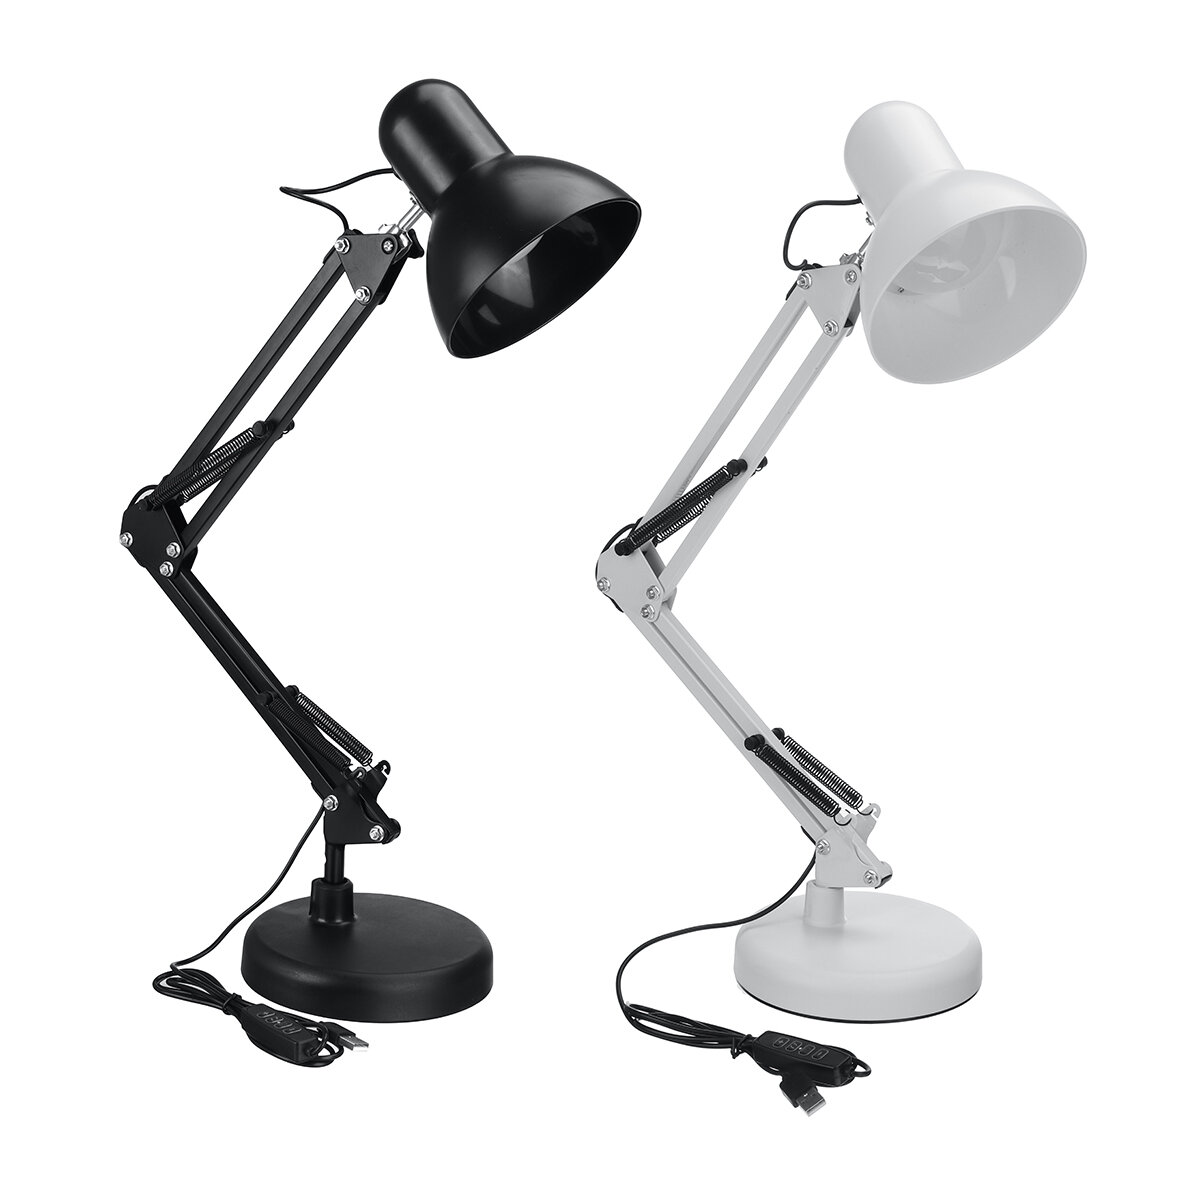 5w 220v Stepless Dimming Flexible Arm, Adjustable Table Lamp With Swing Arm